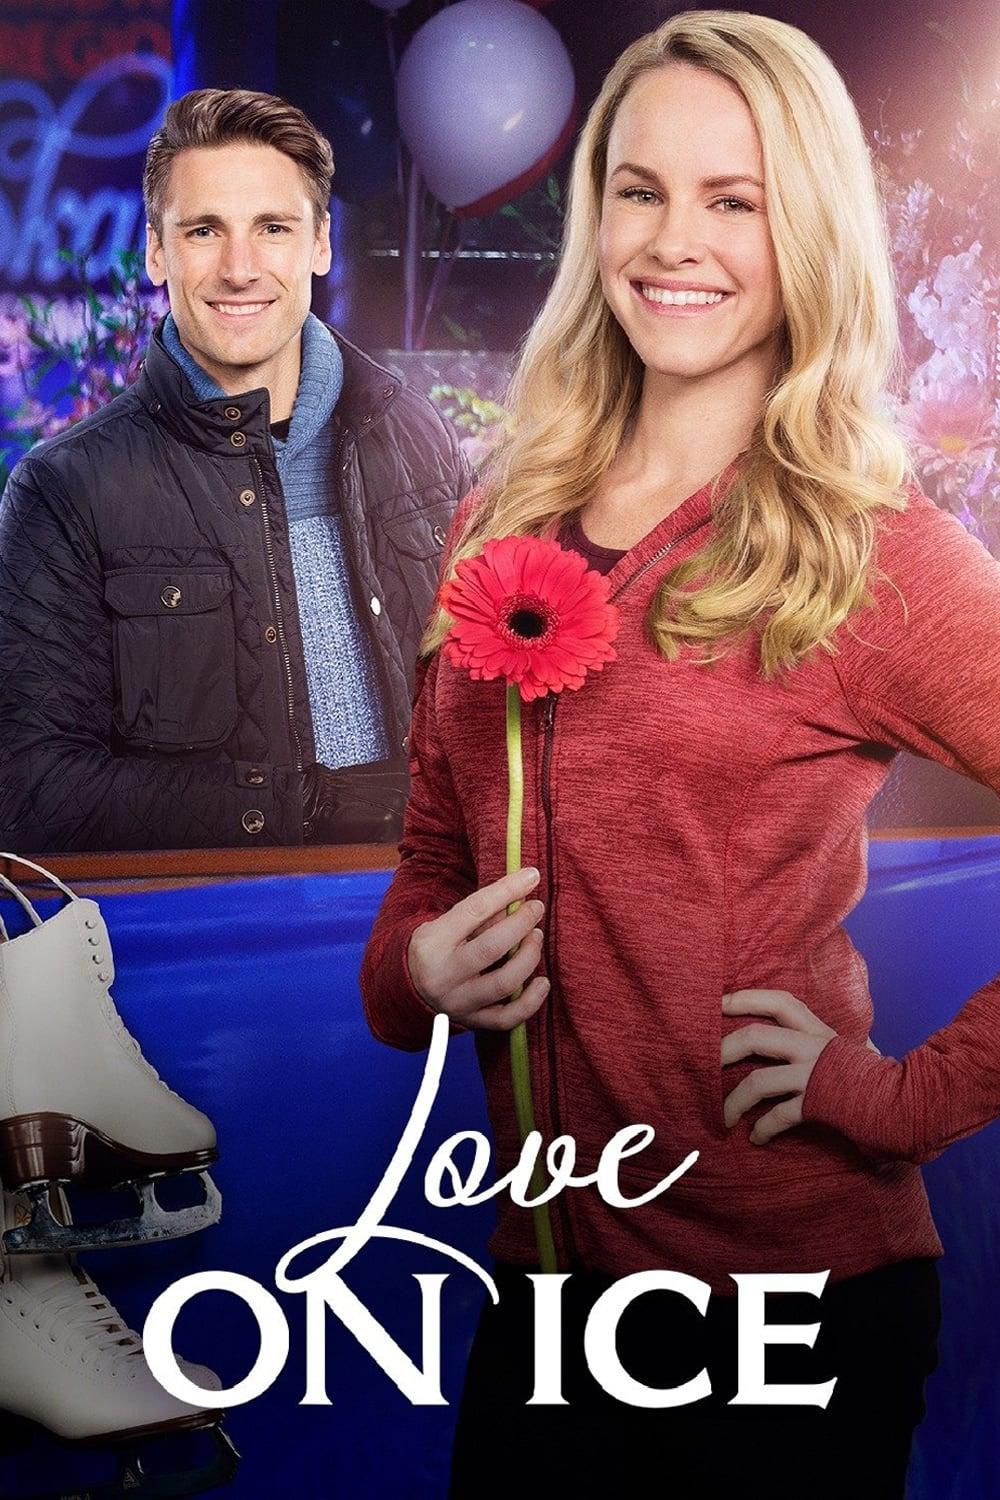 Love on Ice poster